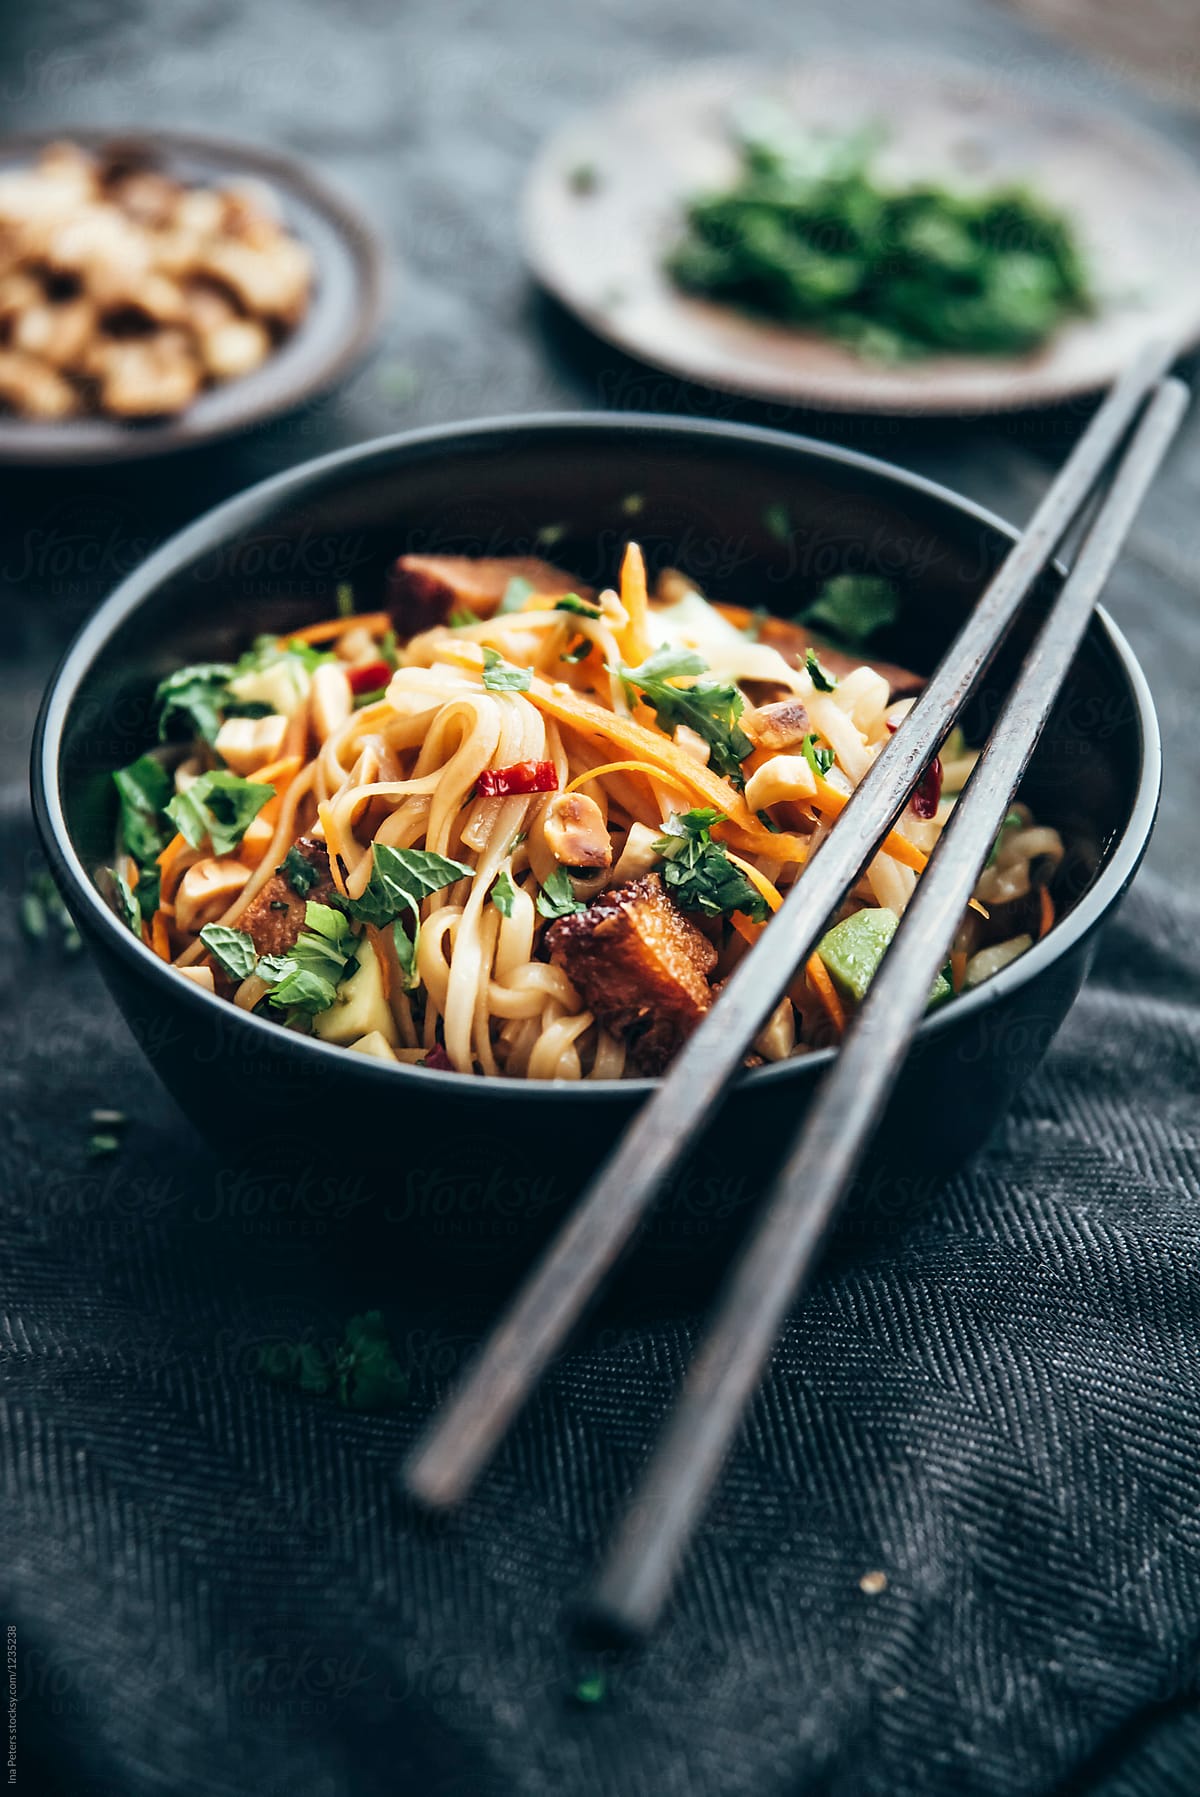 Food: Asian rice noodles with vegetables, tofu, herbs and peanut